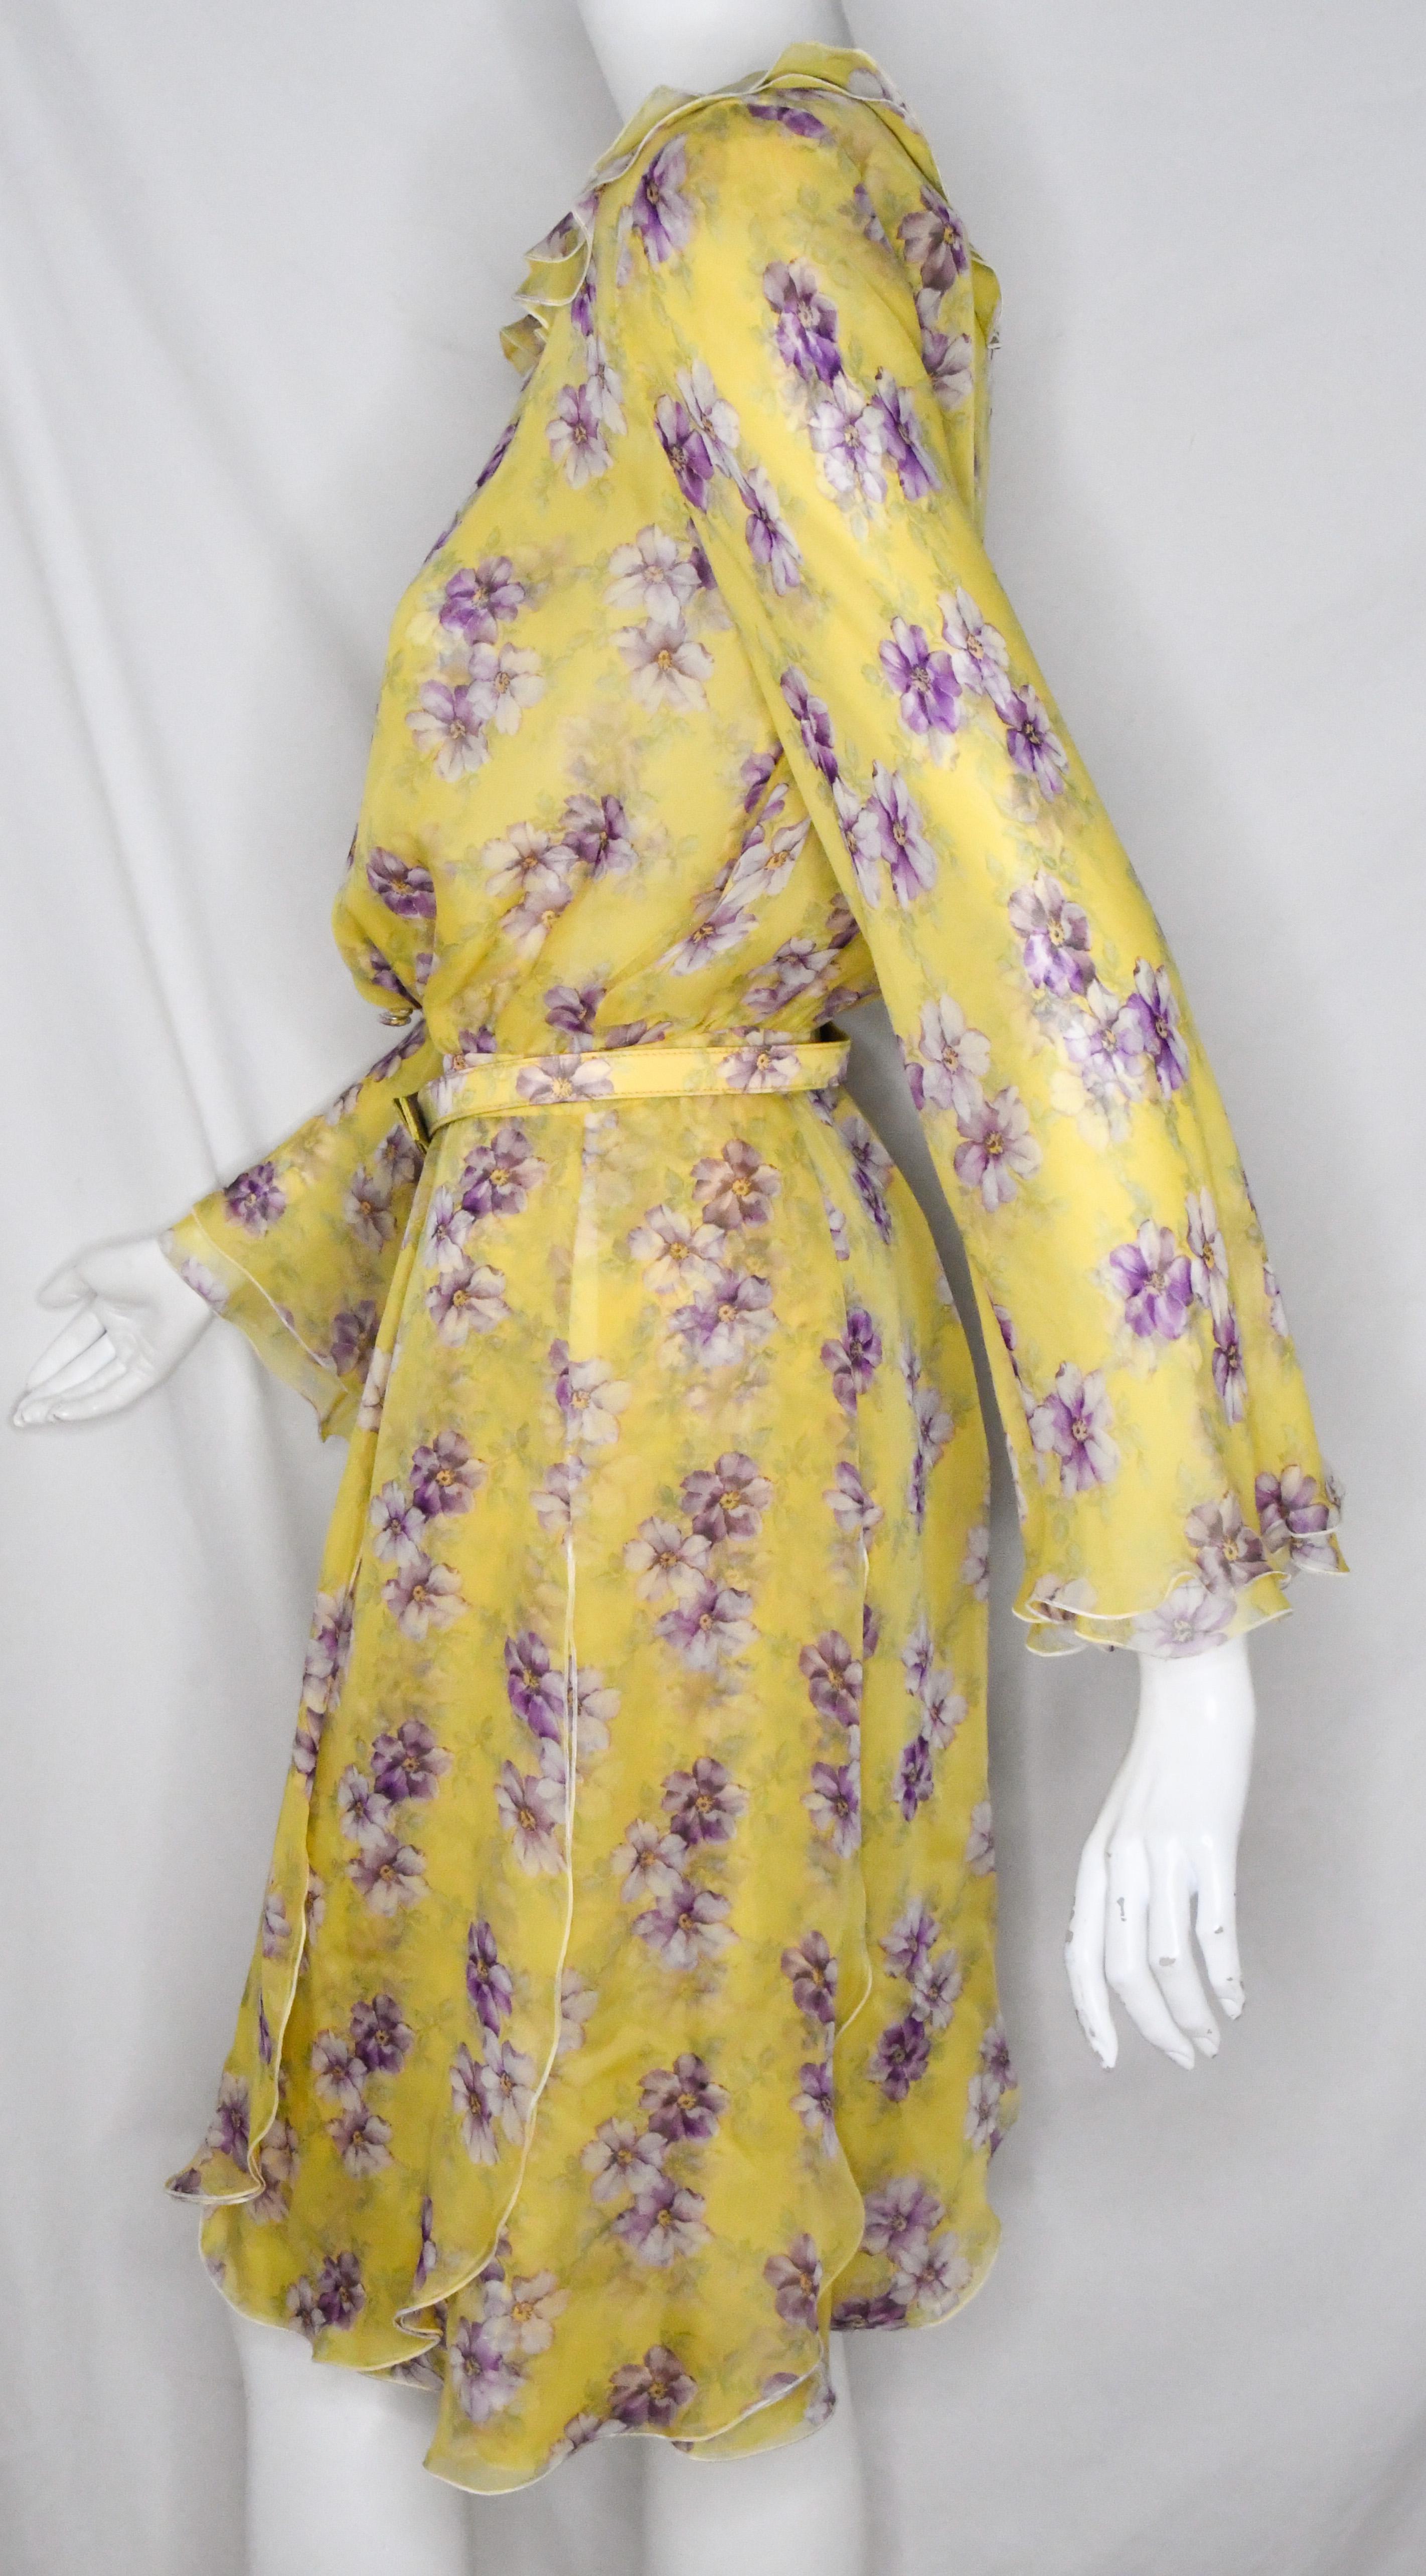 This dress exemplifies the couture techniques that made Valentino Garavani a favorite of royals, celebrities, and socialites for over 50 years.  Effortlessly feminine dress features the most exquisite silk in a glorious shade of sunburst yellow. 